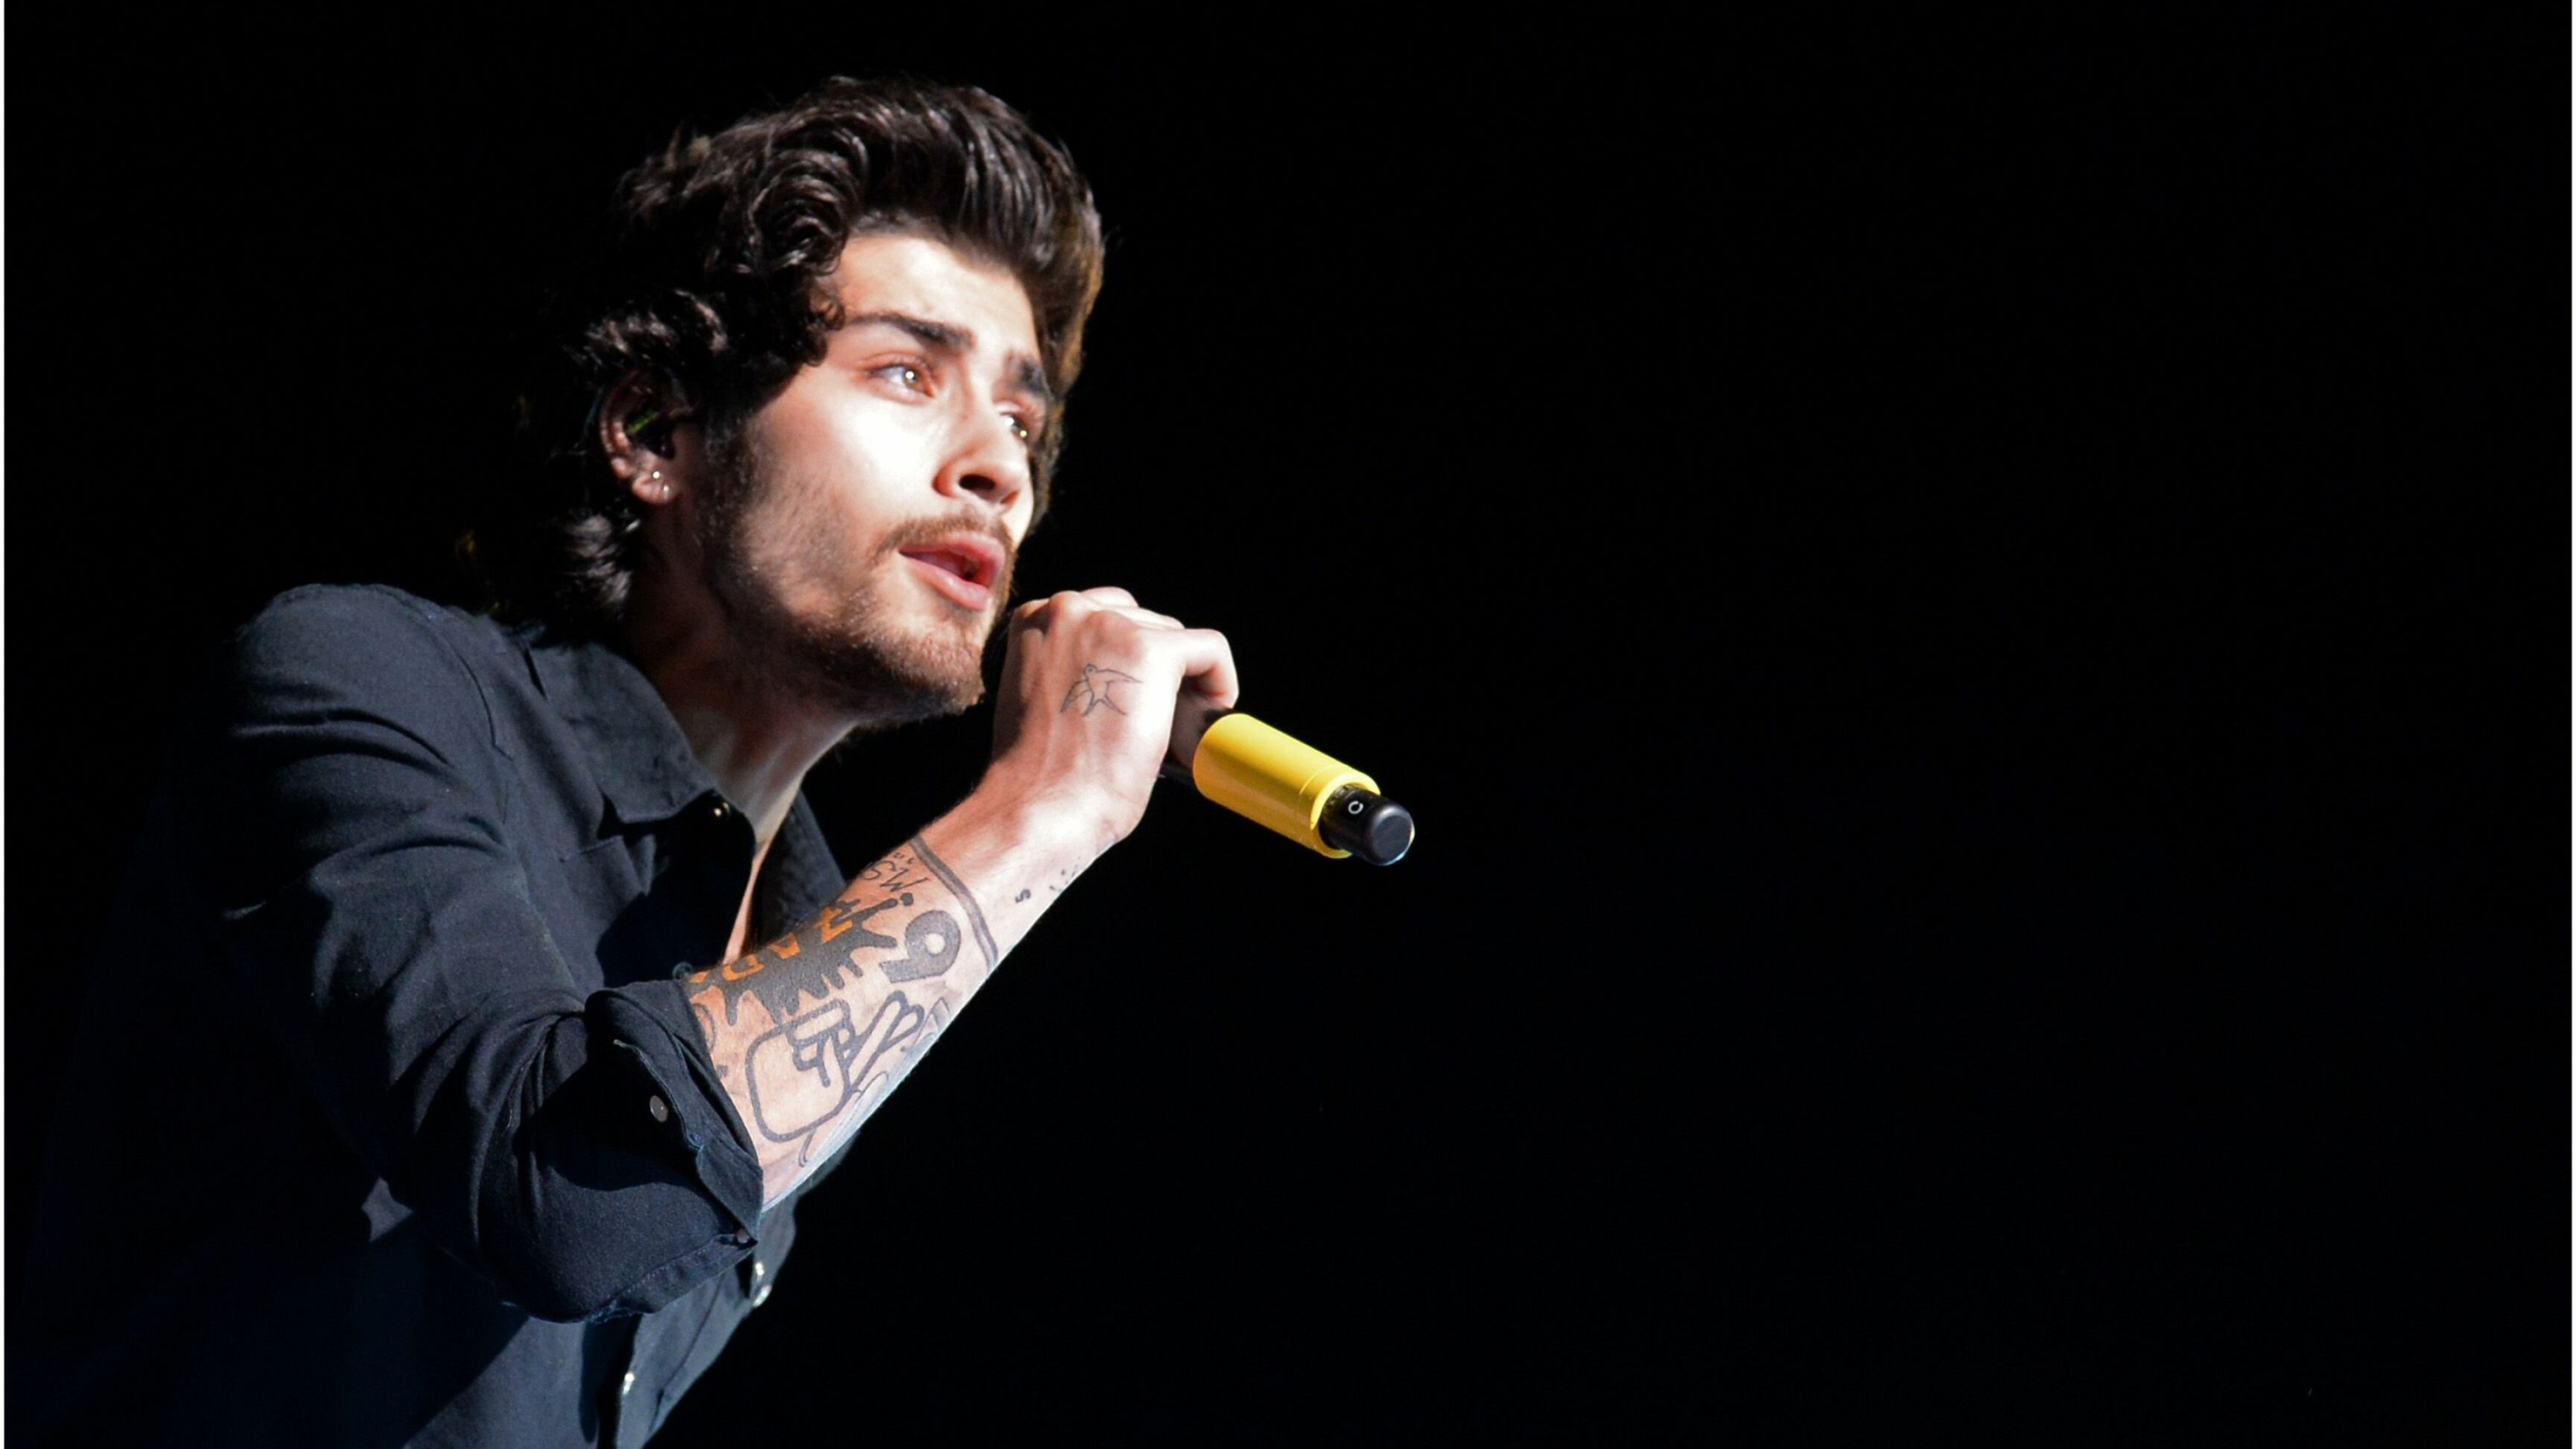 Zayn Malik: Signed a solo recording contract with RCA Records in 2015. 3840x2160 4K Background.